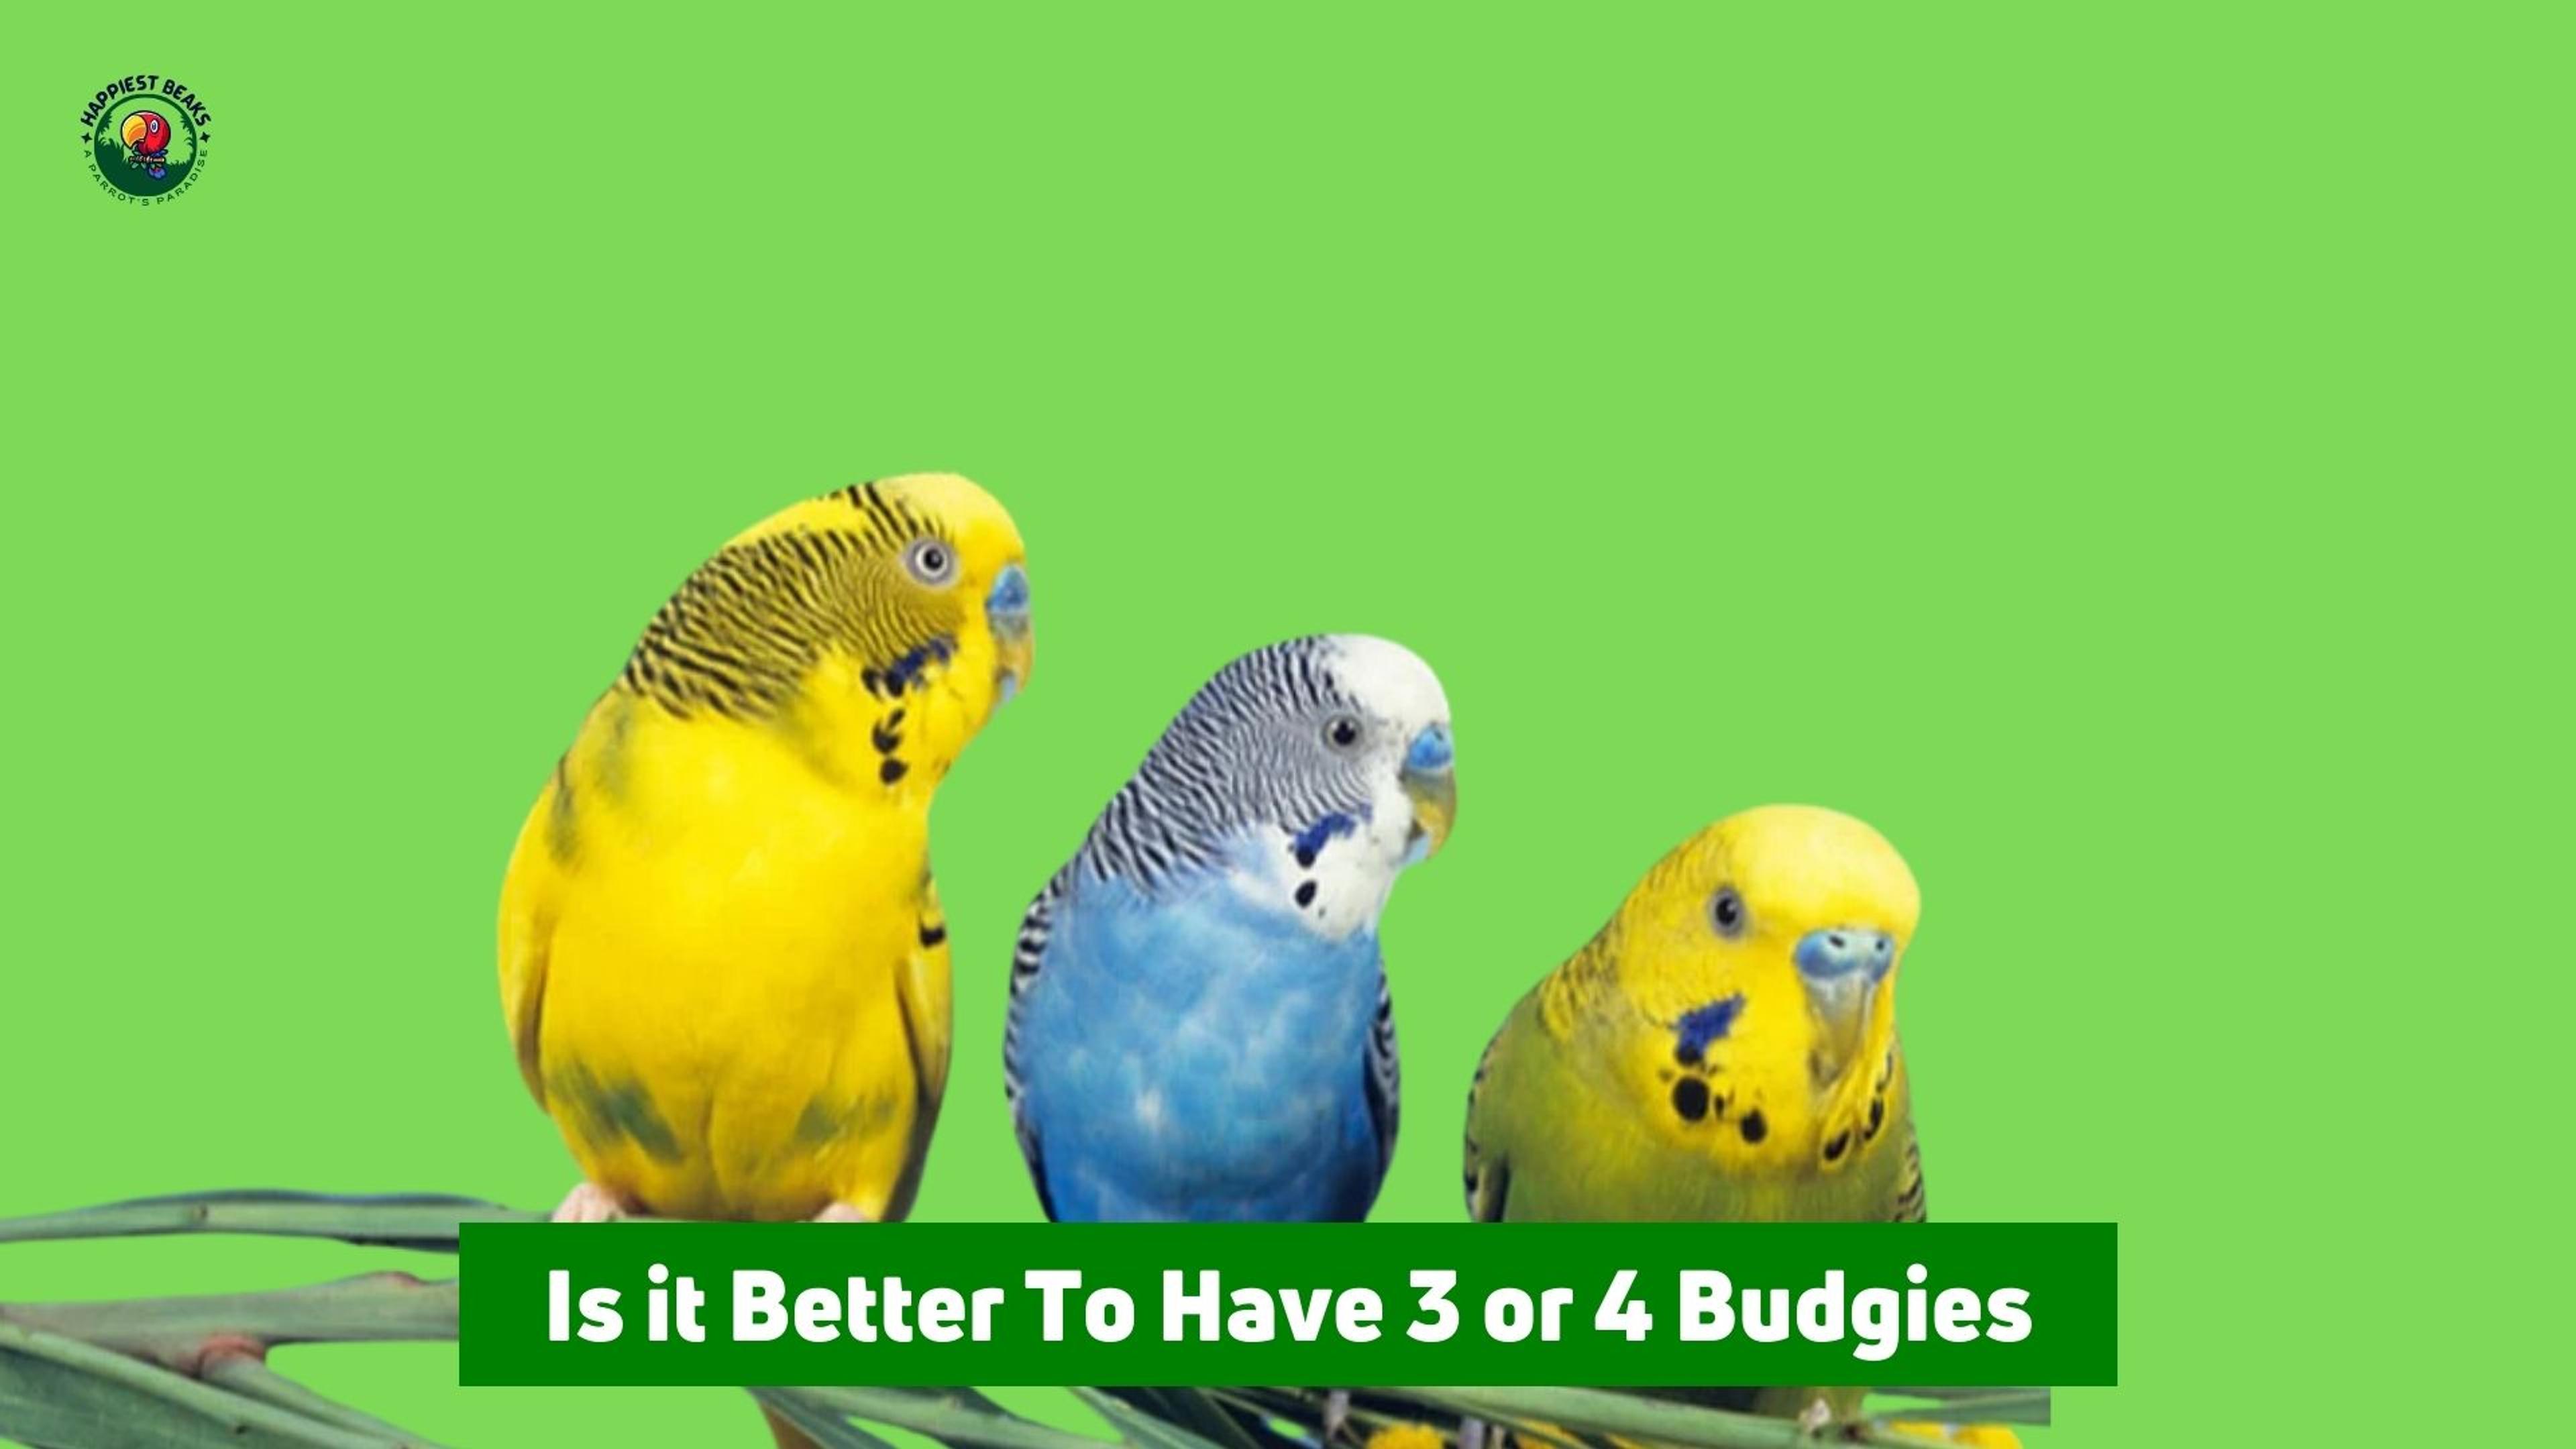 Is It Better To Have 3 or 4 Budgies?